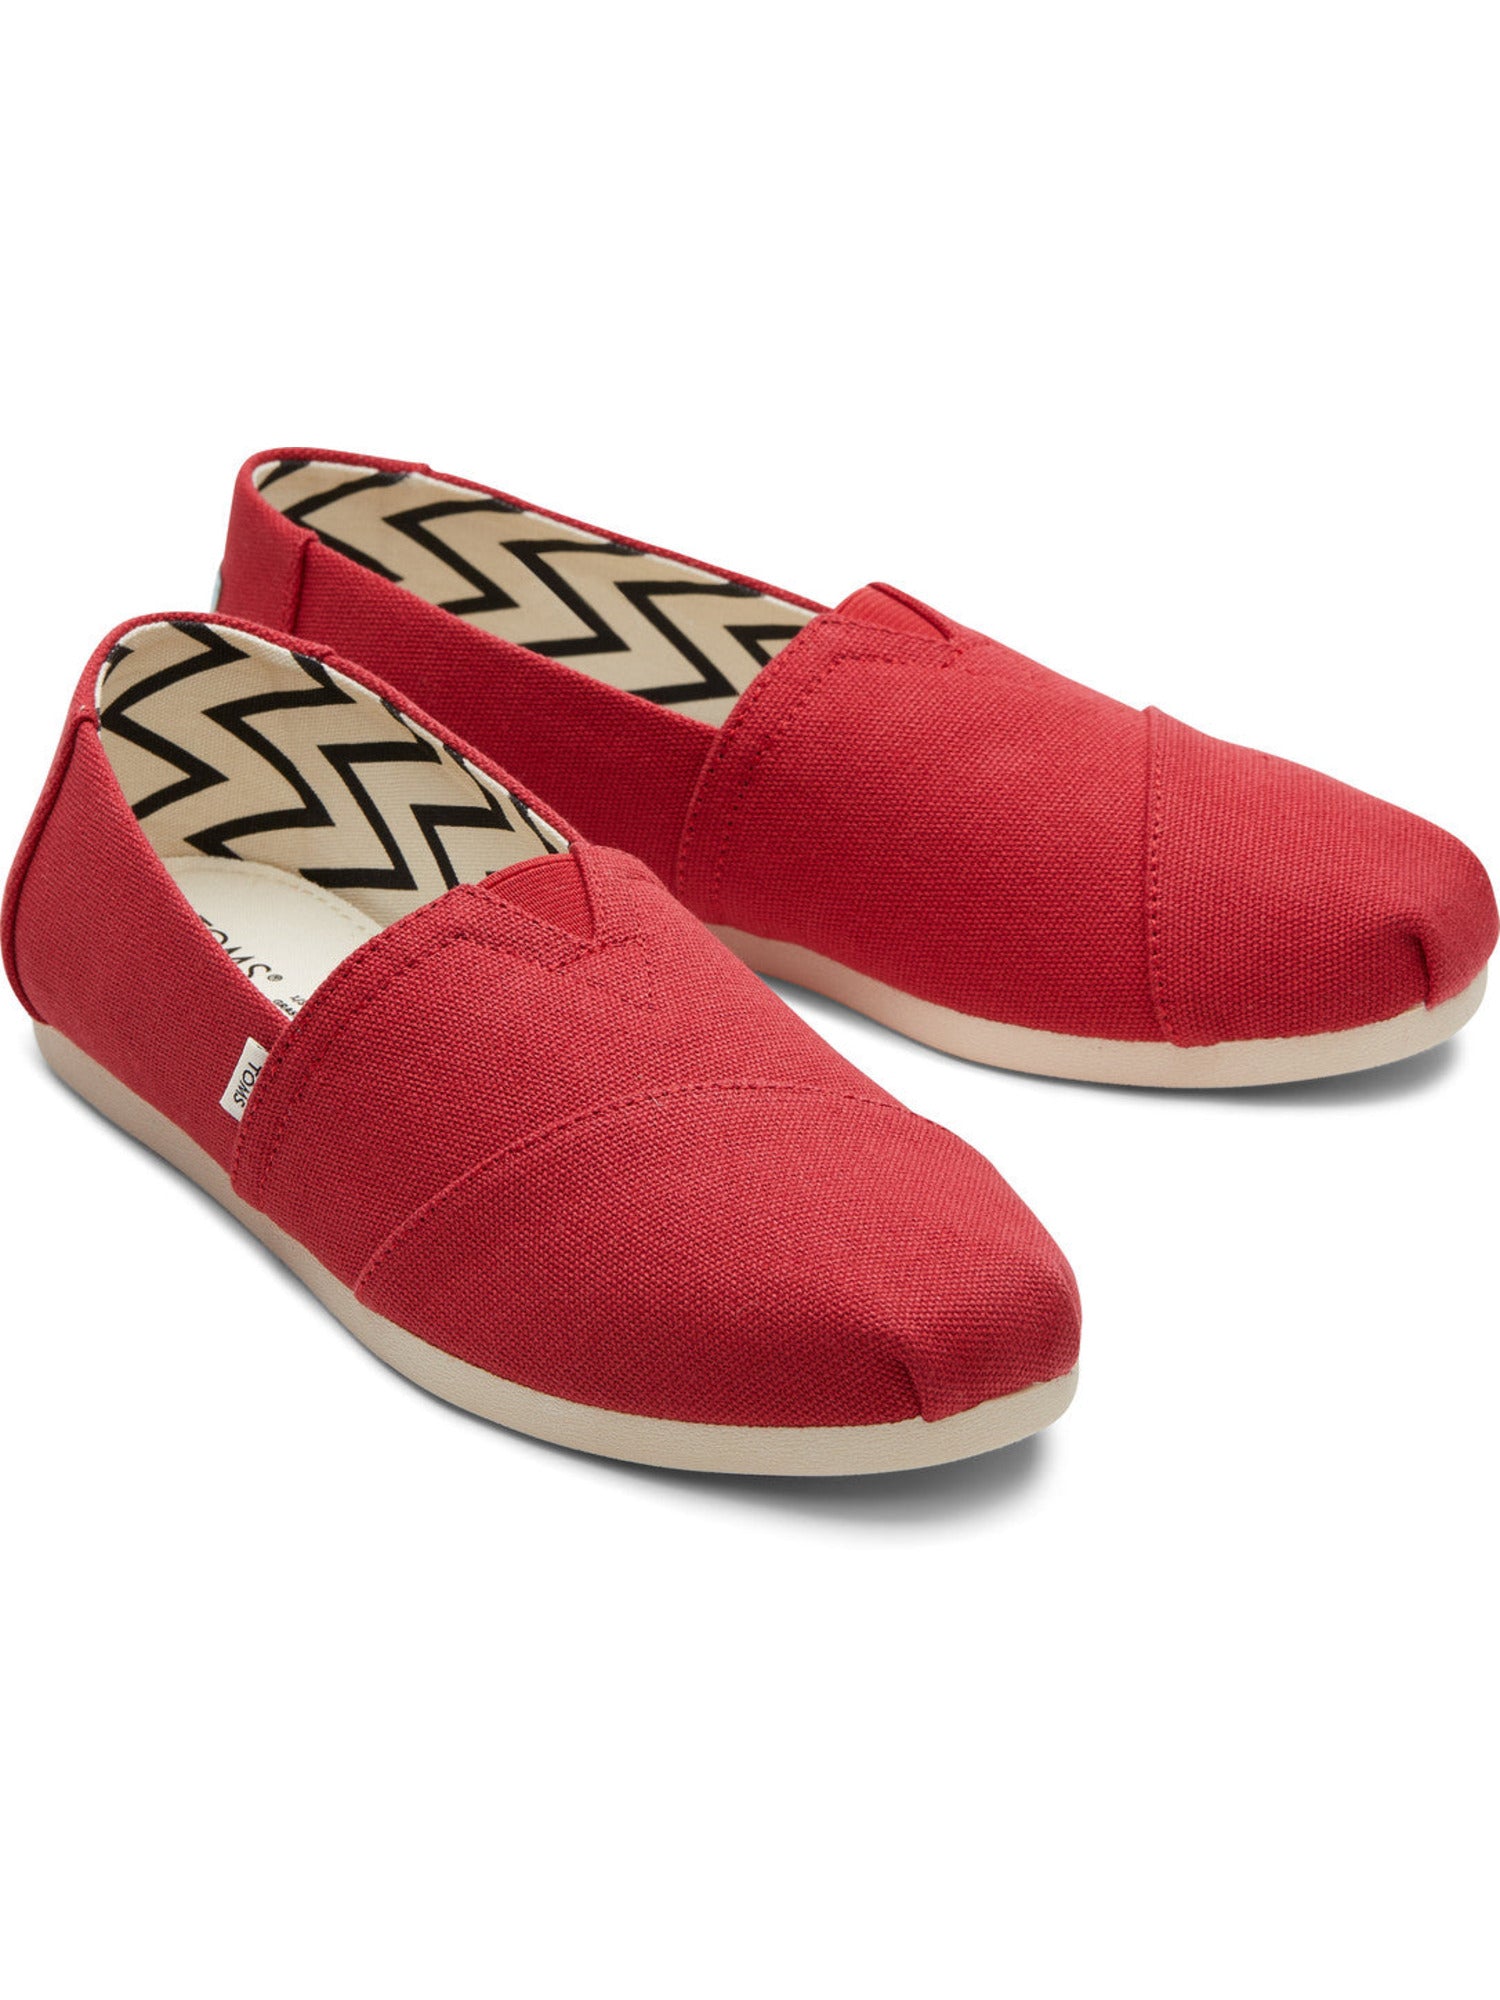 Iconic Alp Cotton Soft Red Canvas Slip Ons-TOMS® India Official Site